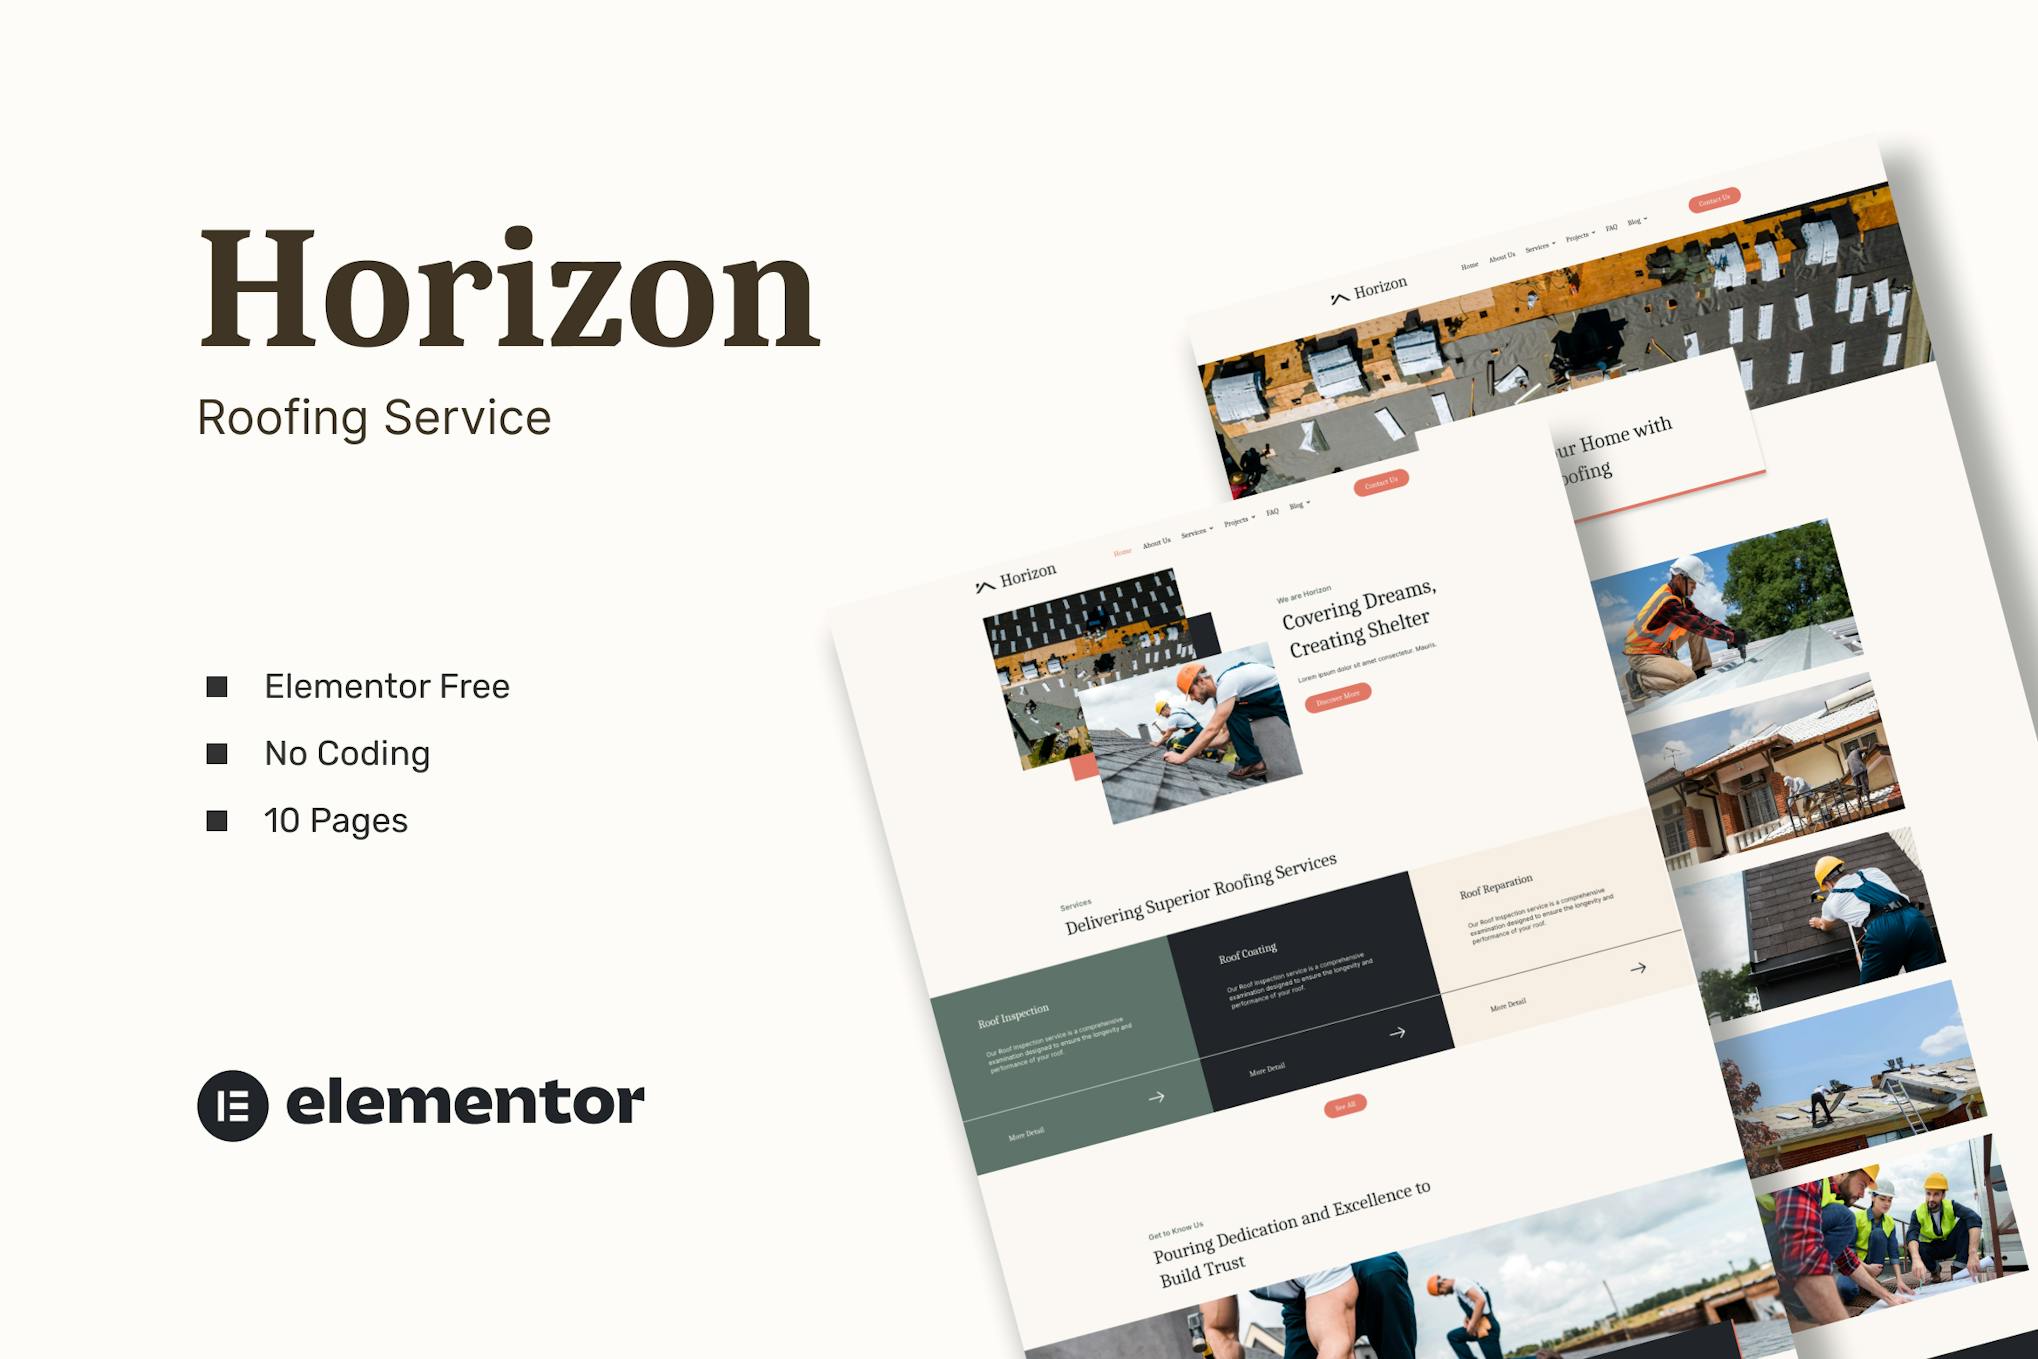 Download Horizon - Roofing Service Elementor Template Kits